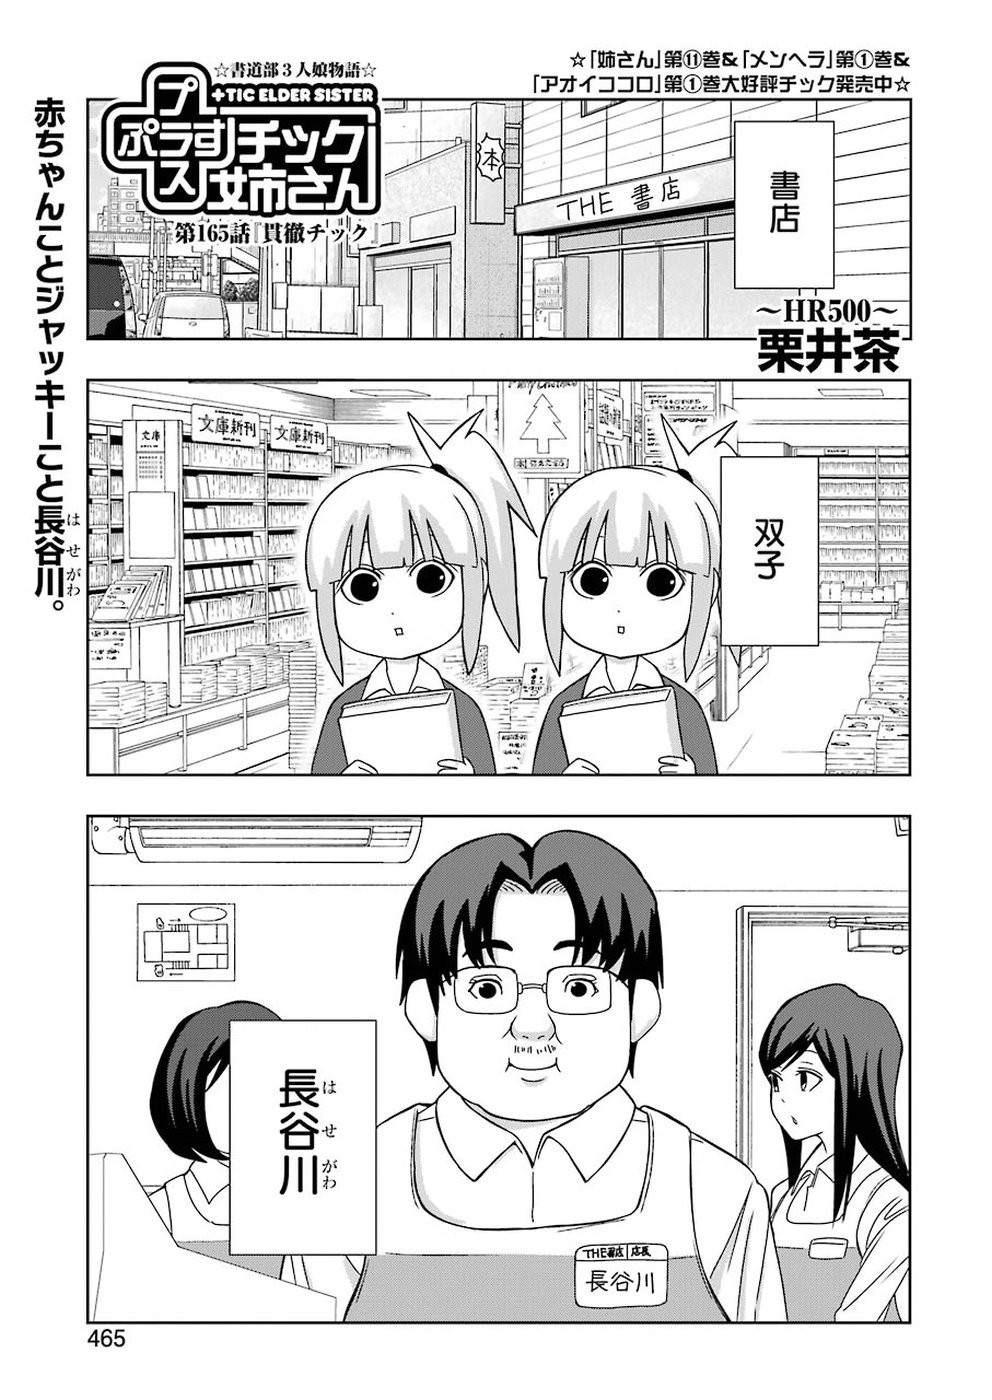 + Tic Nee-san - Chapter 165 - Page 1